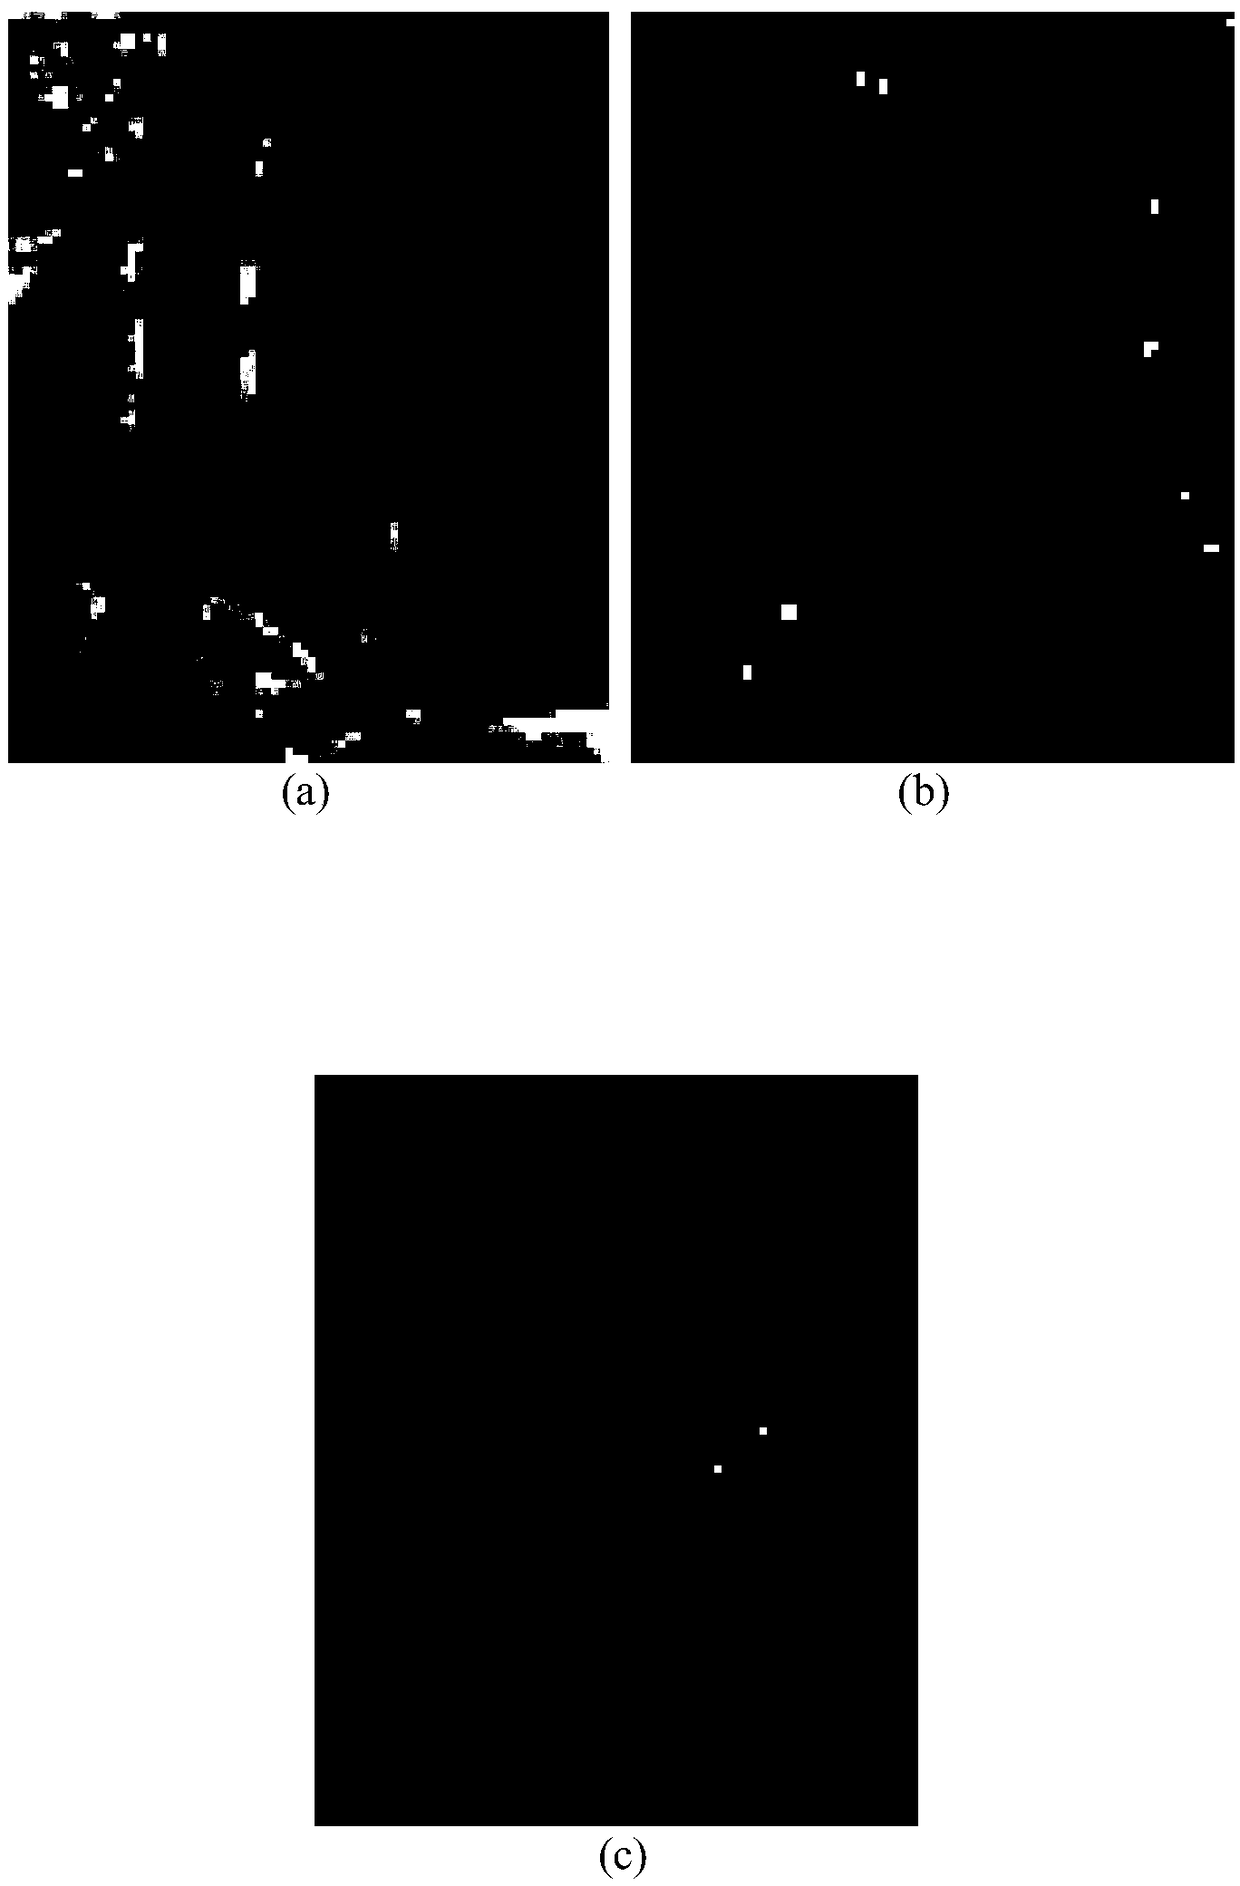 Hyperspectral image anomaly detection method based on joint extraction of spatial-spectral characteristics